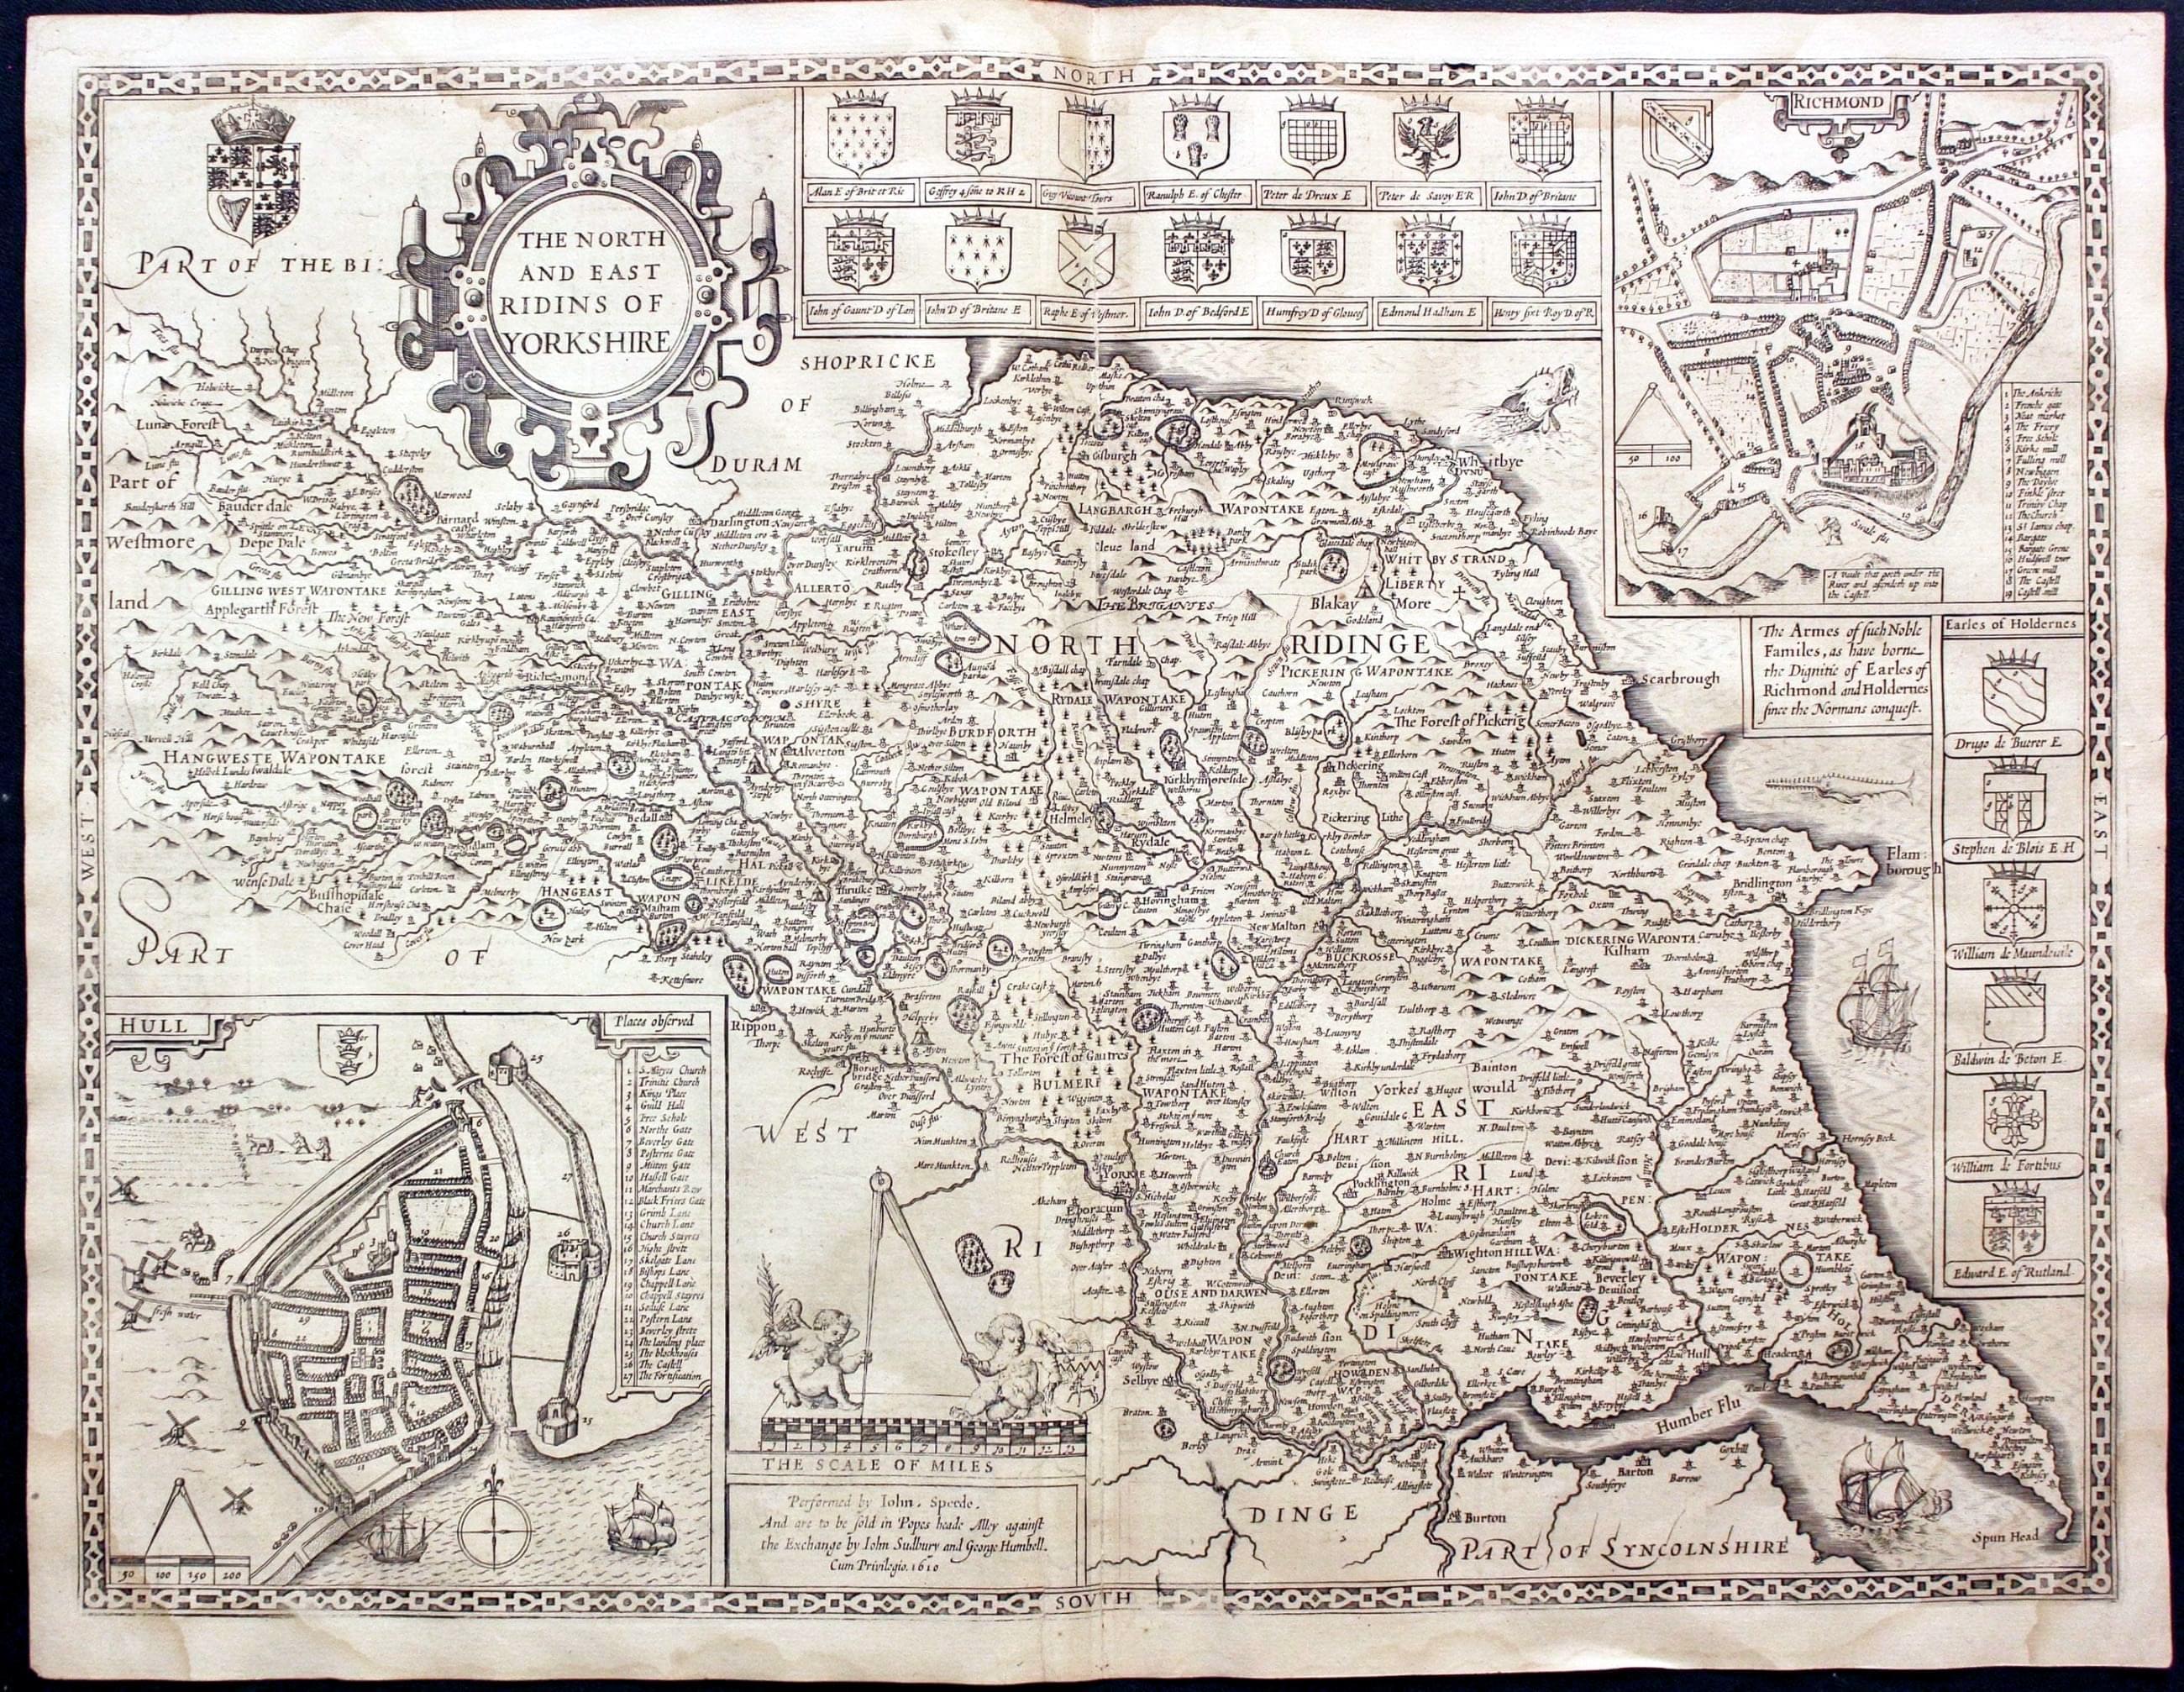 Map of North & East Ridings of Yorkshire by John Speed, 1646